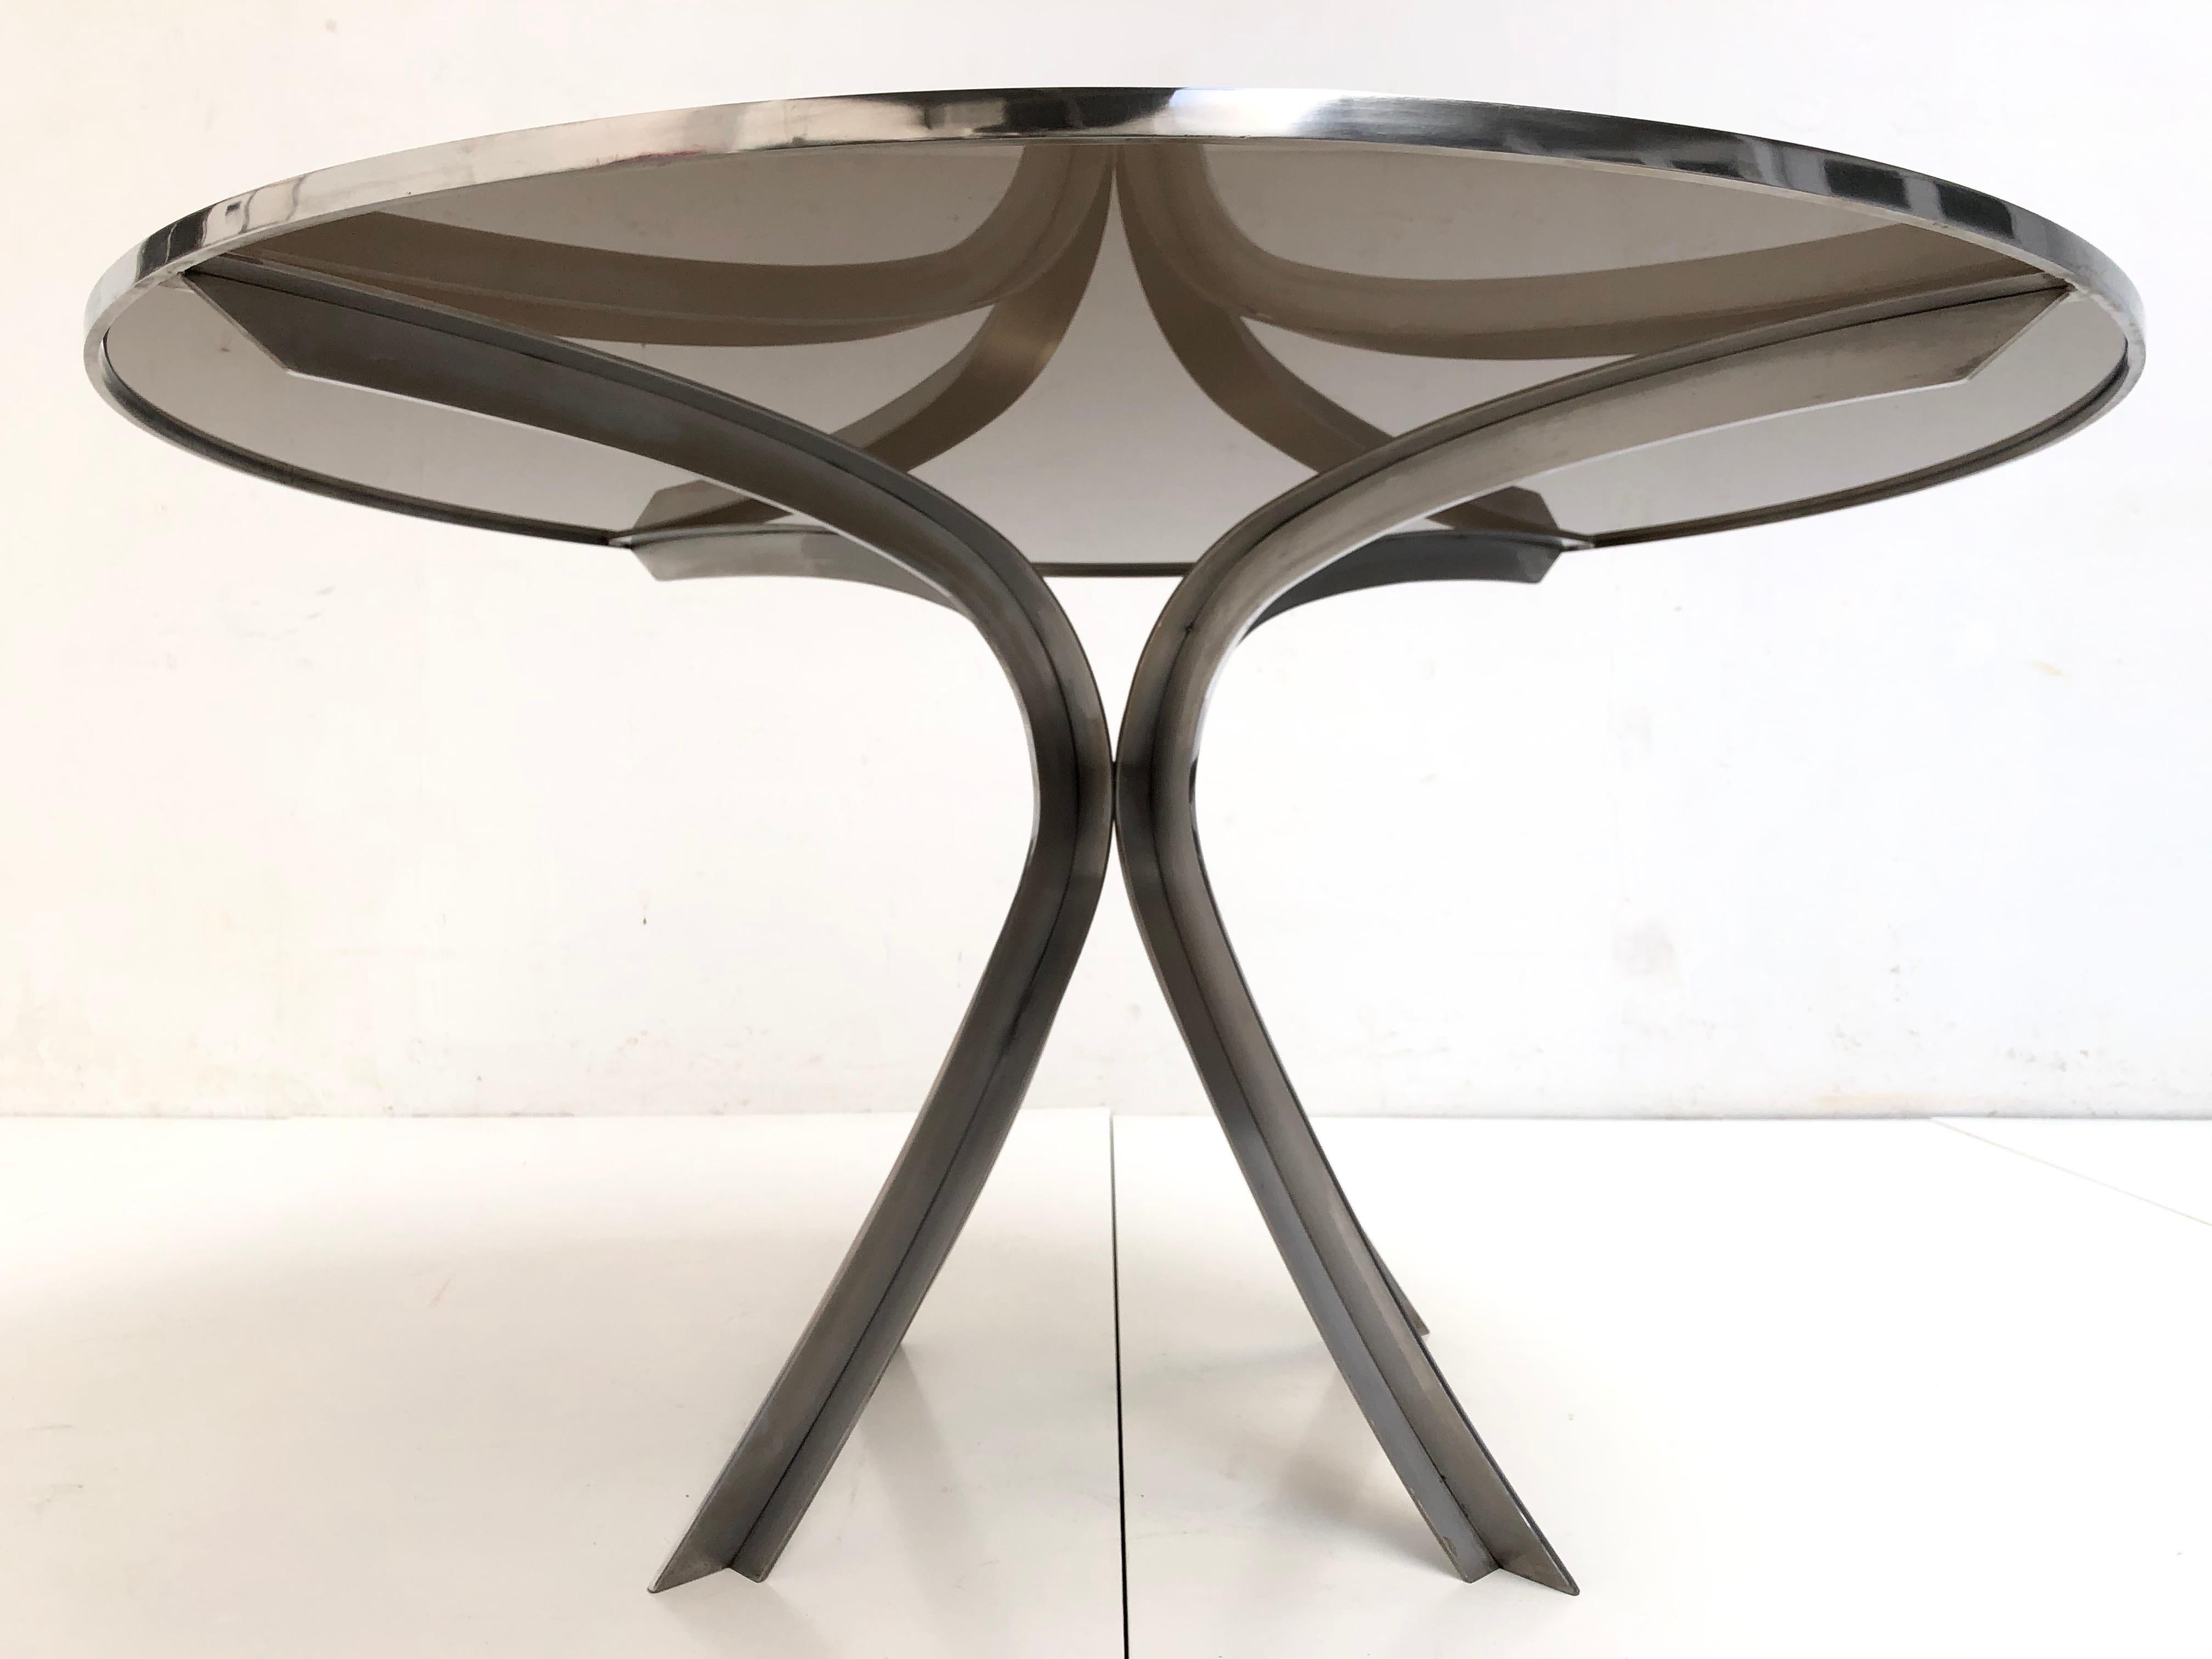 Brushed Sculptural Stainless Steel Smoked Glass Dining Table by Xavier Féal 1970, France